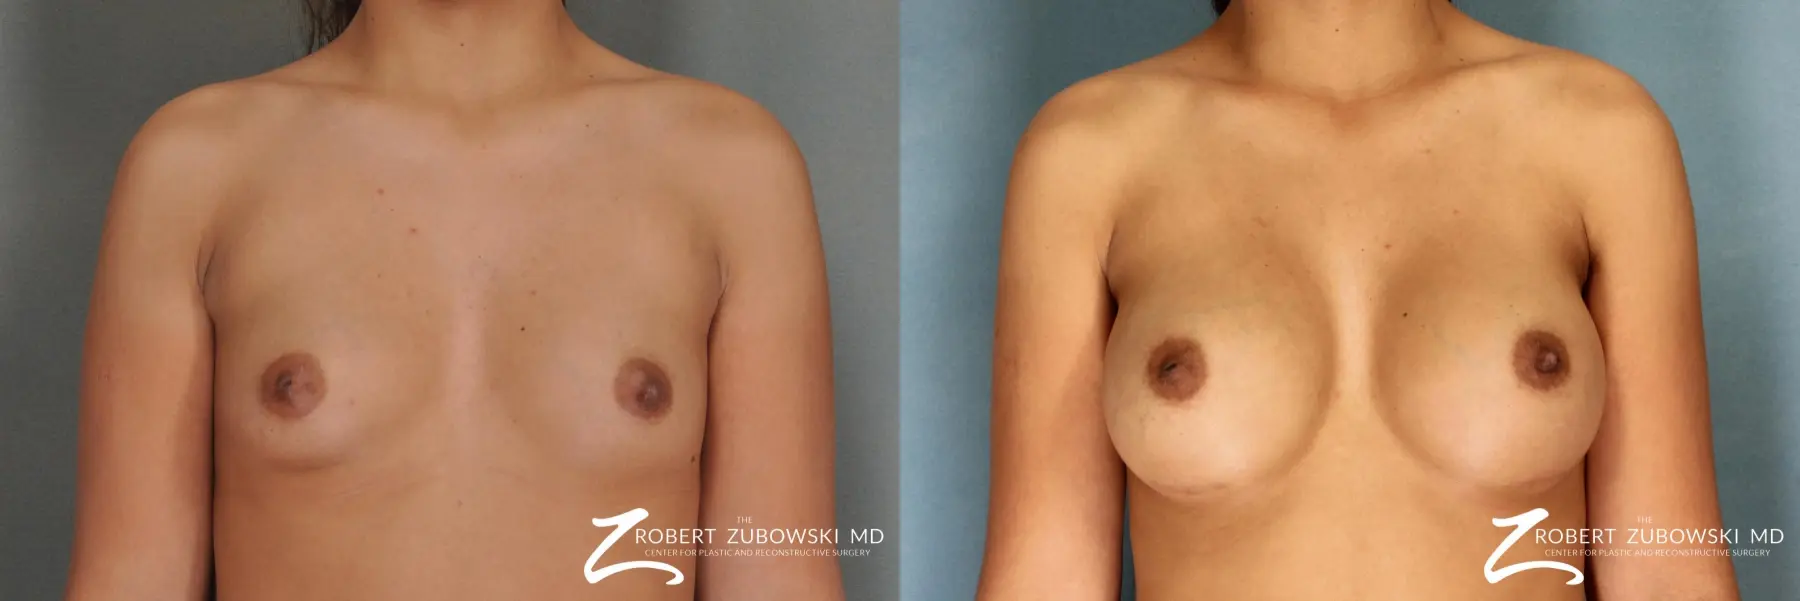 Breast Augmentation: Patient 8 - Before and After  